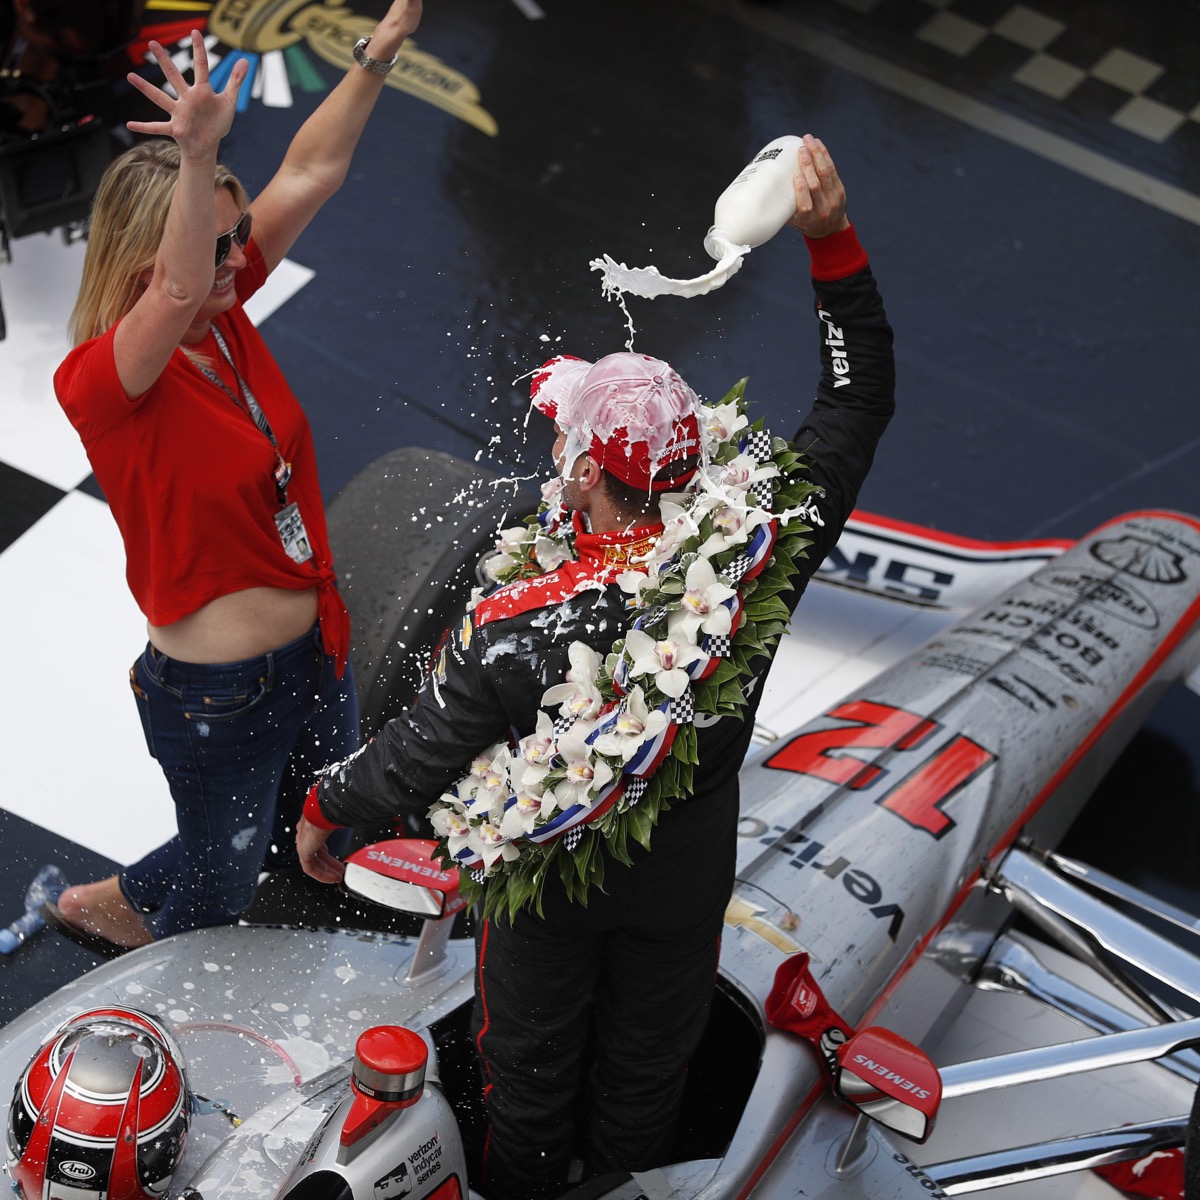 will power gets milk dumped on his head at the 2018 indy 500